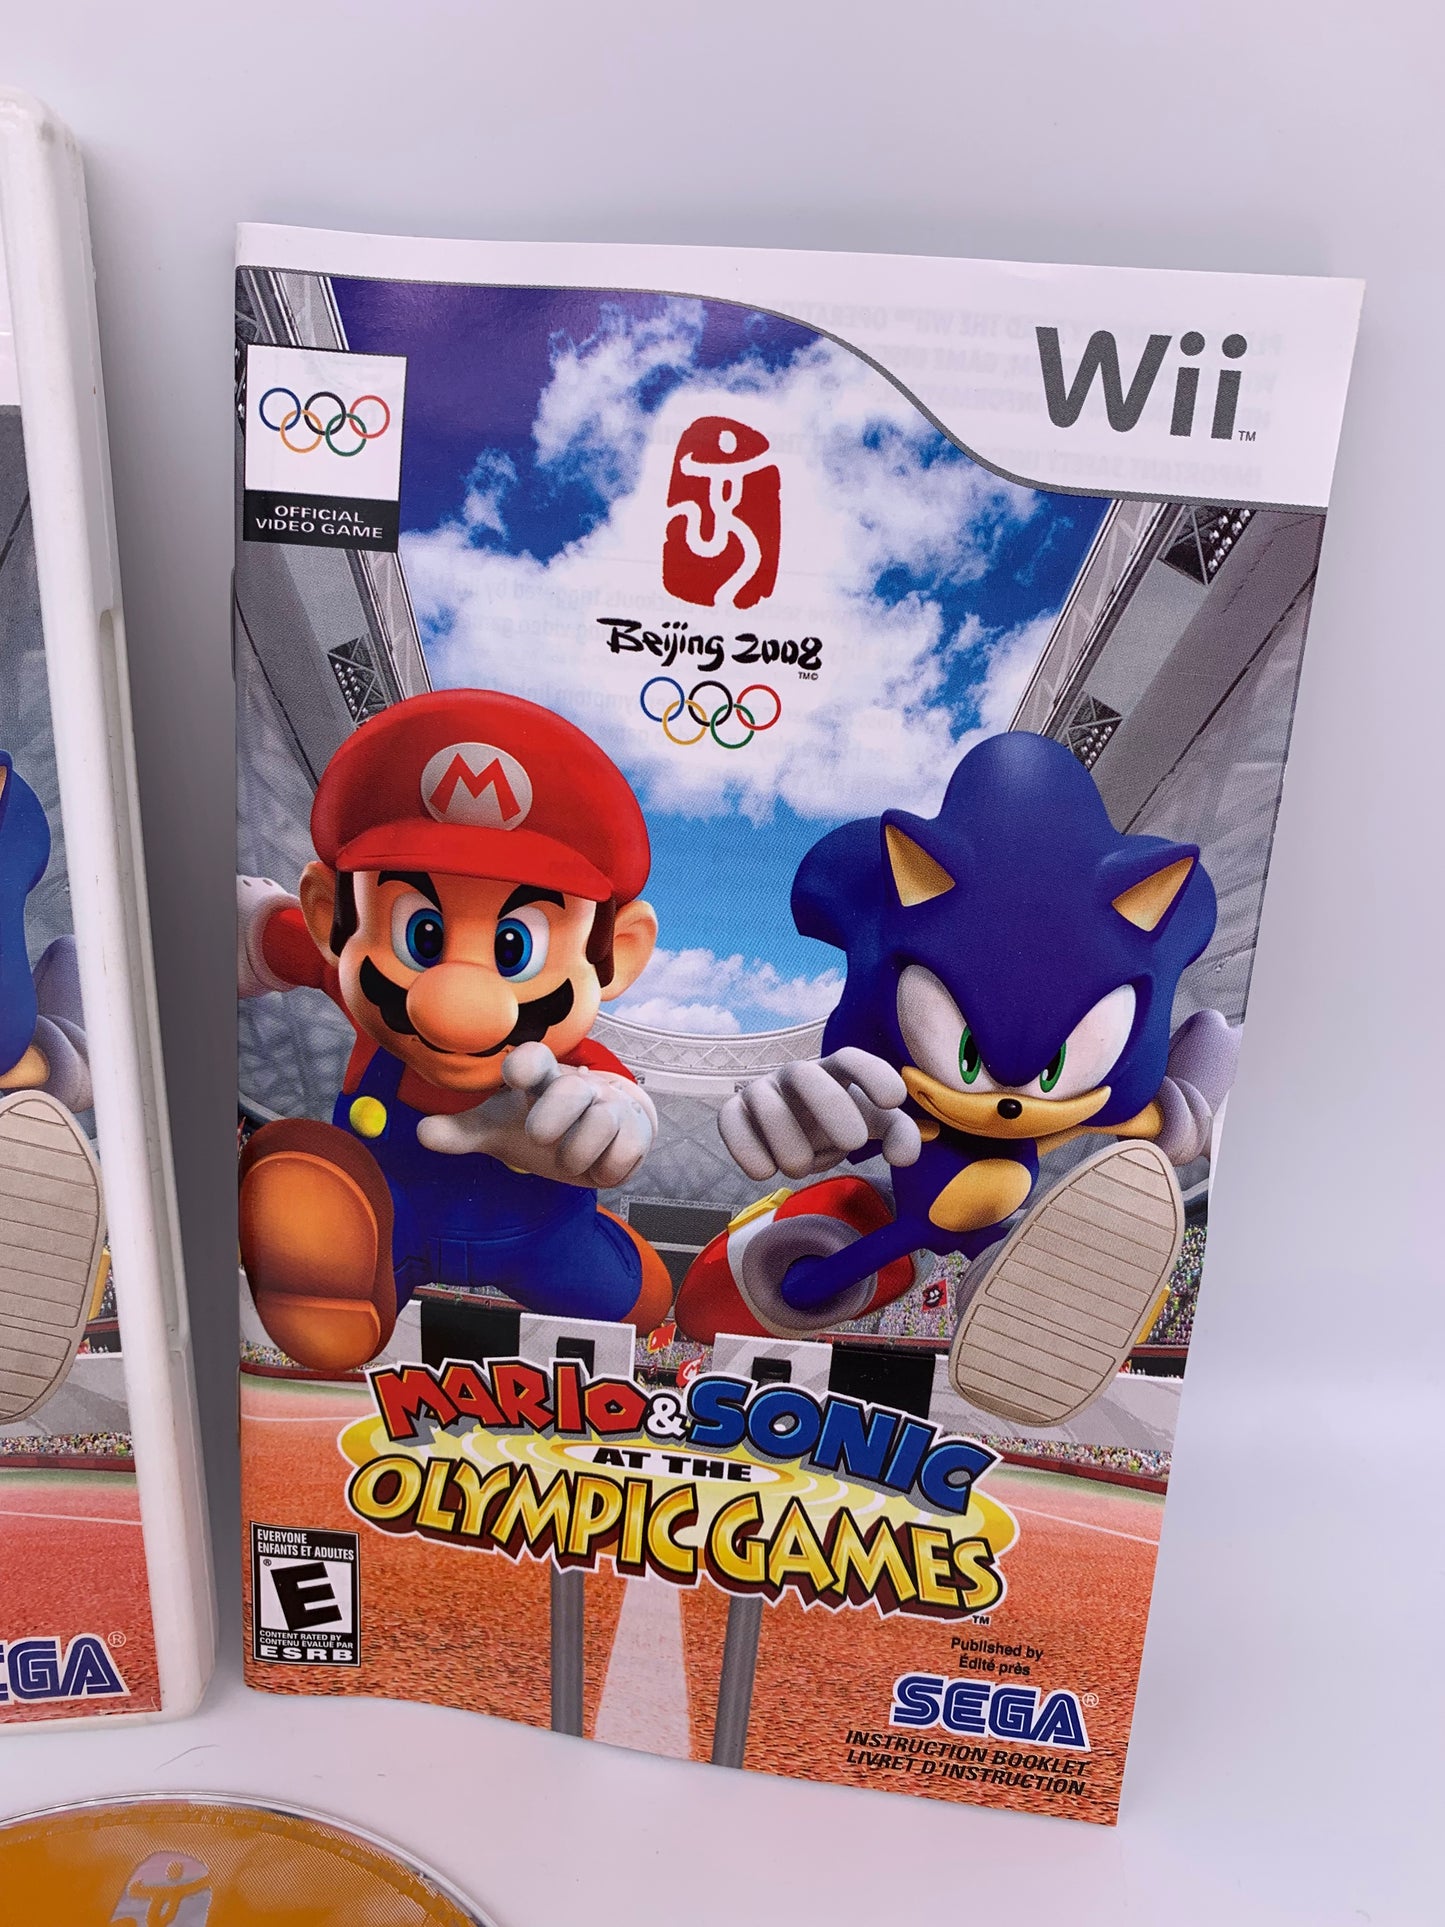 NiNTENDO Wii | MARiO & SONiC AT THE OLYMPiC GAMES BEijiNG 2002